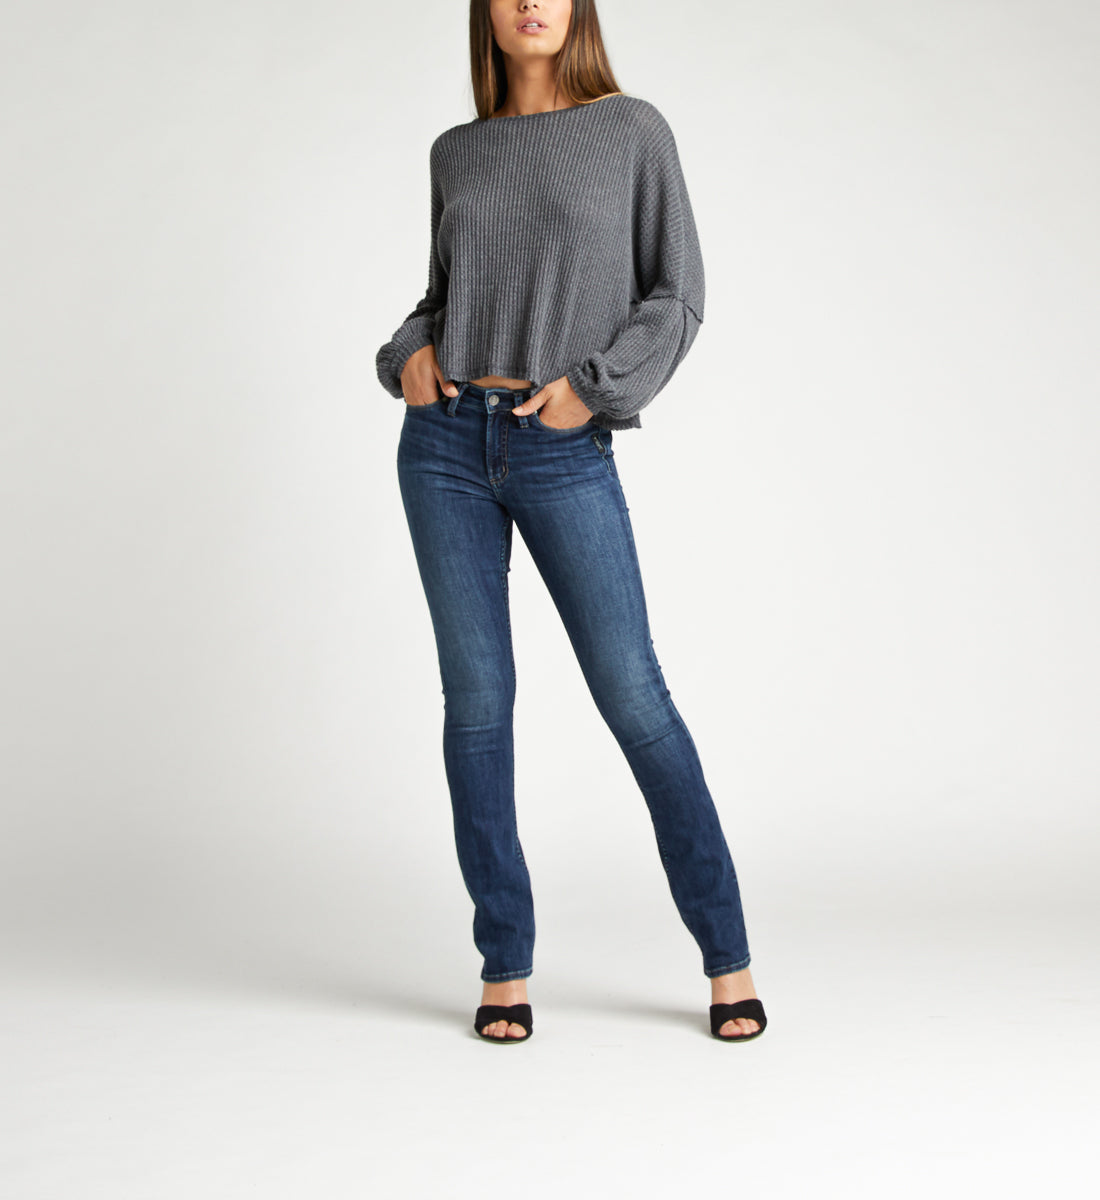 Silver Jeans Most Wanted Mid Rise Skinny Bootcut Jeans